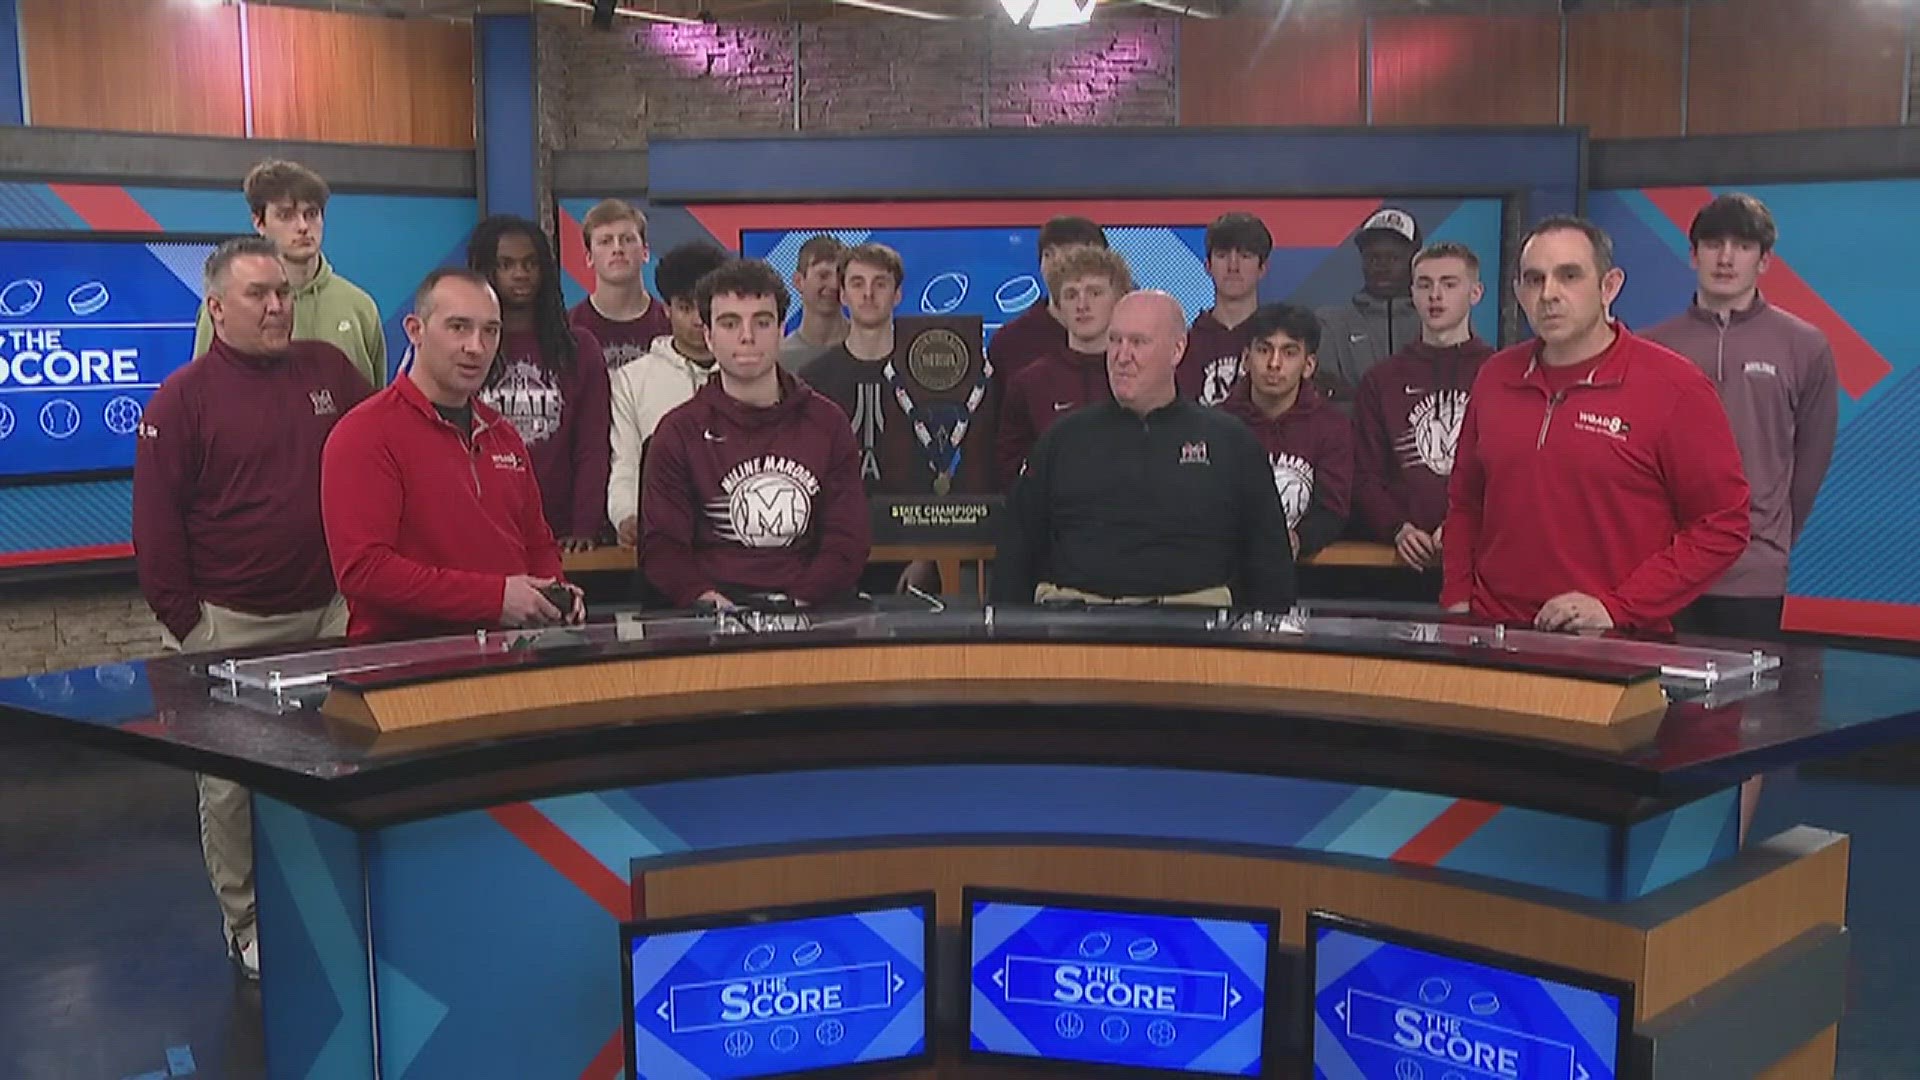 Moline Basketball talks about winning their first State Championship in school history.